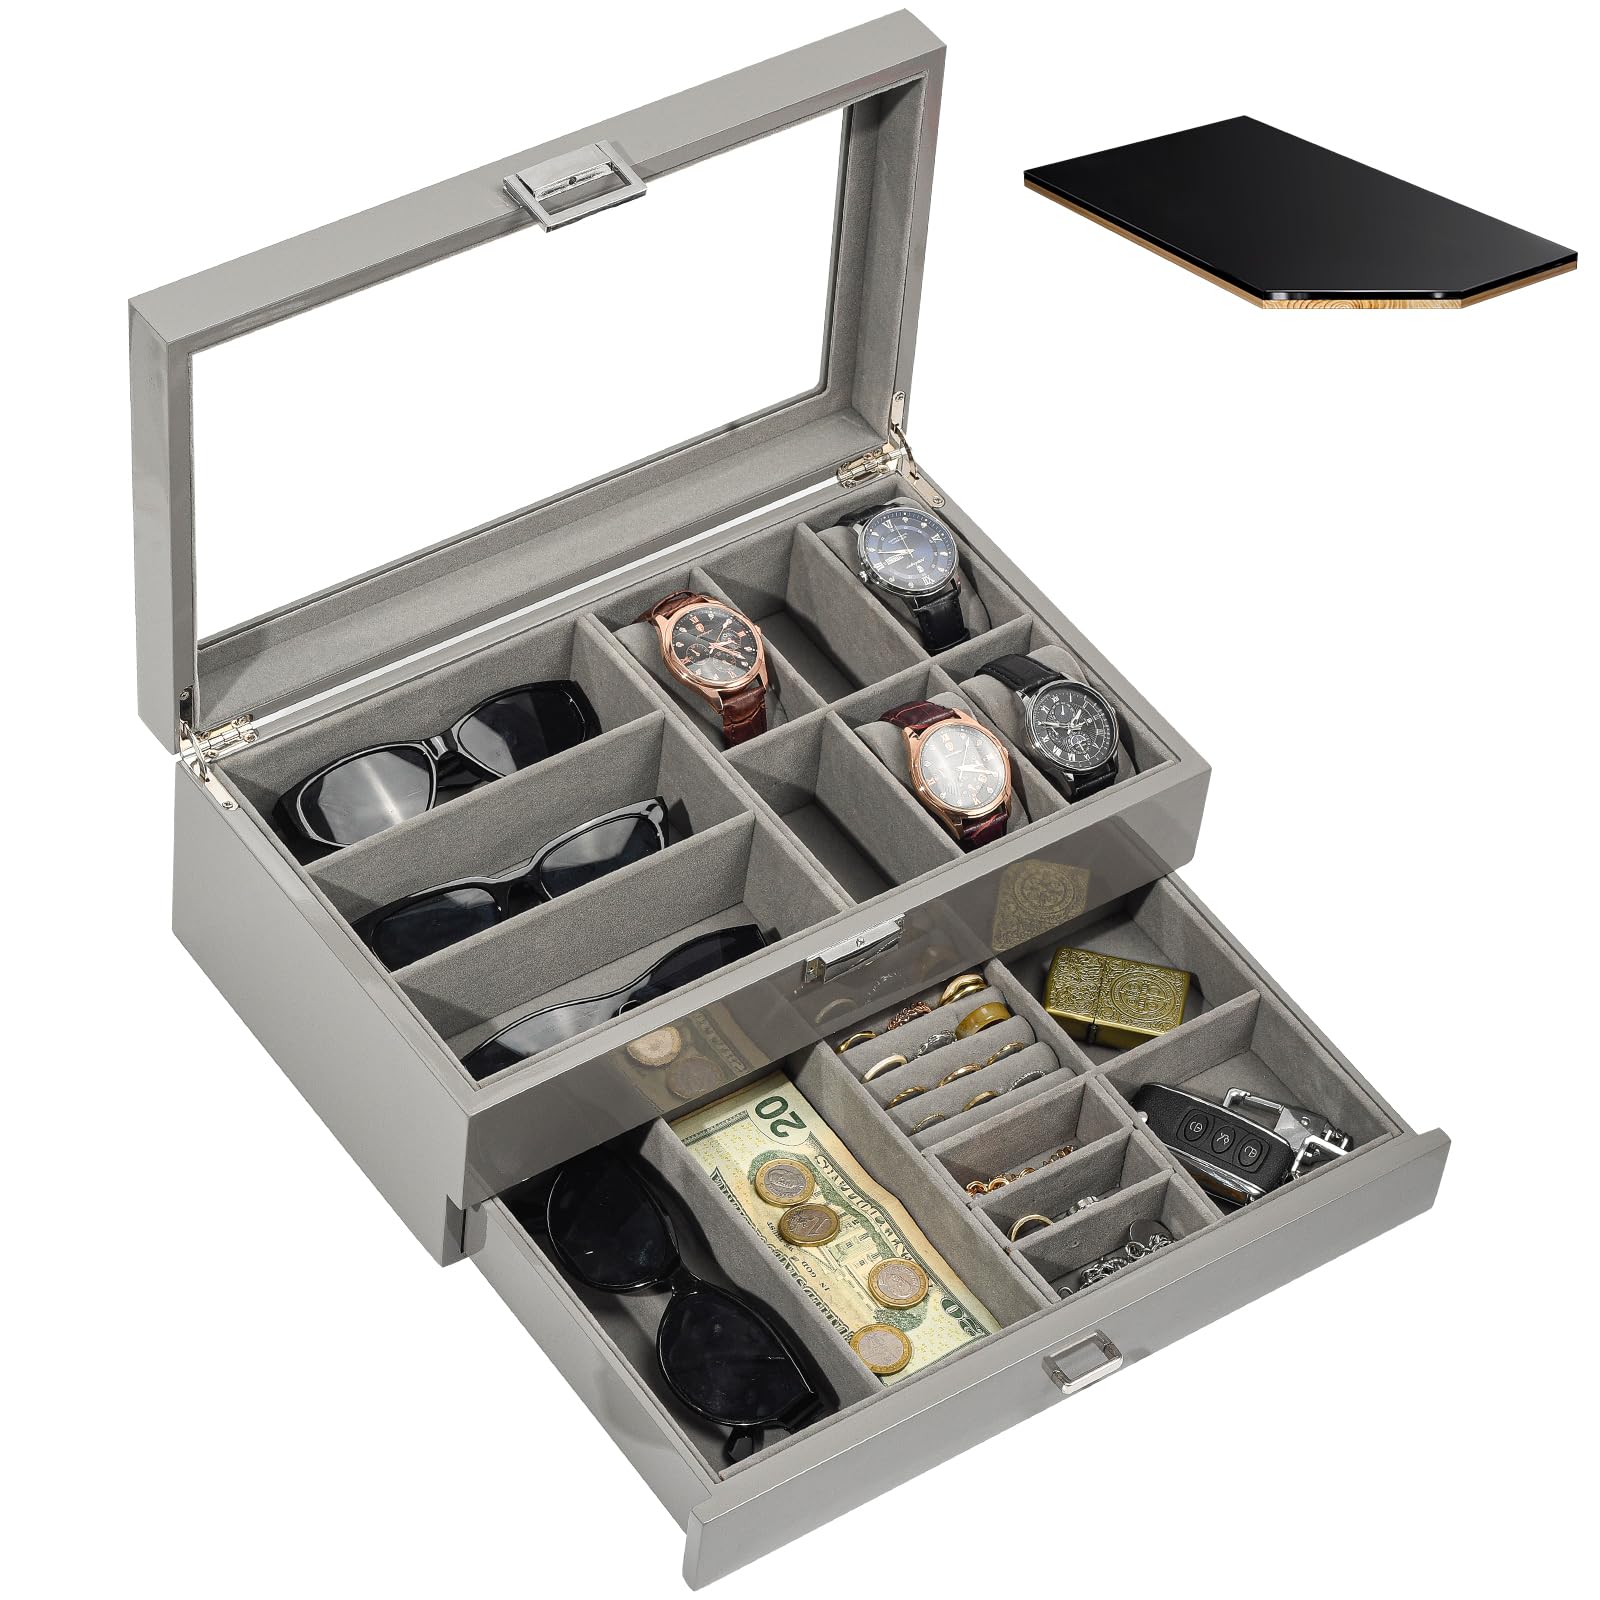 ProCase Lacquered Finish Wooden Men's Jewelry Box, Watch and Sunglasses Box Organizer for Men, 2-Tier Watch Holder Display Cases with Clear Glass Top and Storage Drawer -Grey